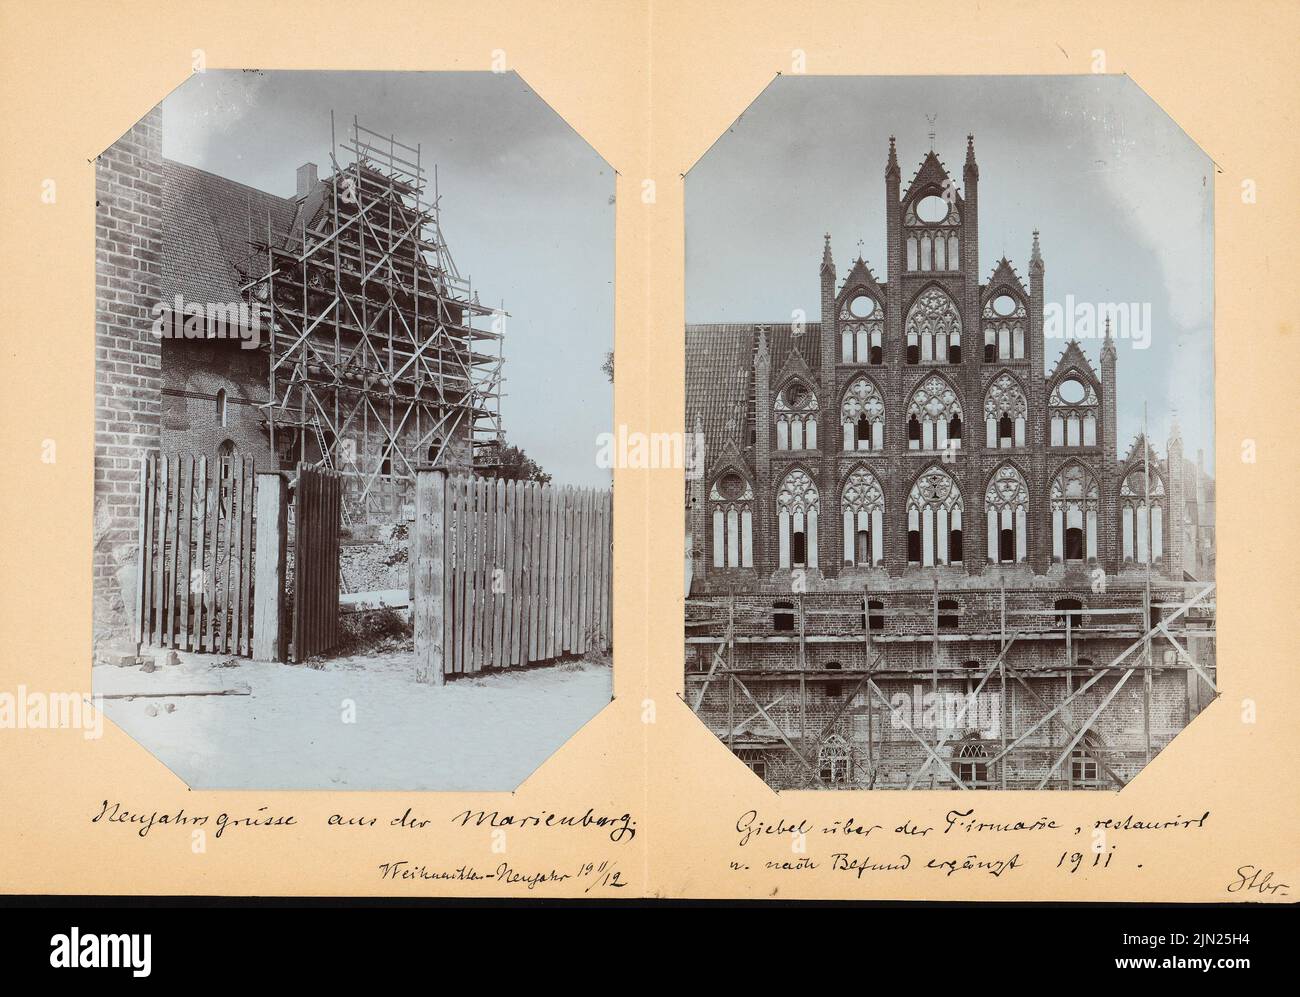 Steinbrecht Conrad (1849-1923), Marienburg, Restoration under Steinbrecht 1882-1918, letters and photos to R. Persius: New Year's card, Giebel above the Firmarie, restored and supplemented. Photo on cardboard, 21.3 x 30.5 cm (including scan edges) Stock Photo